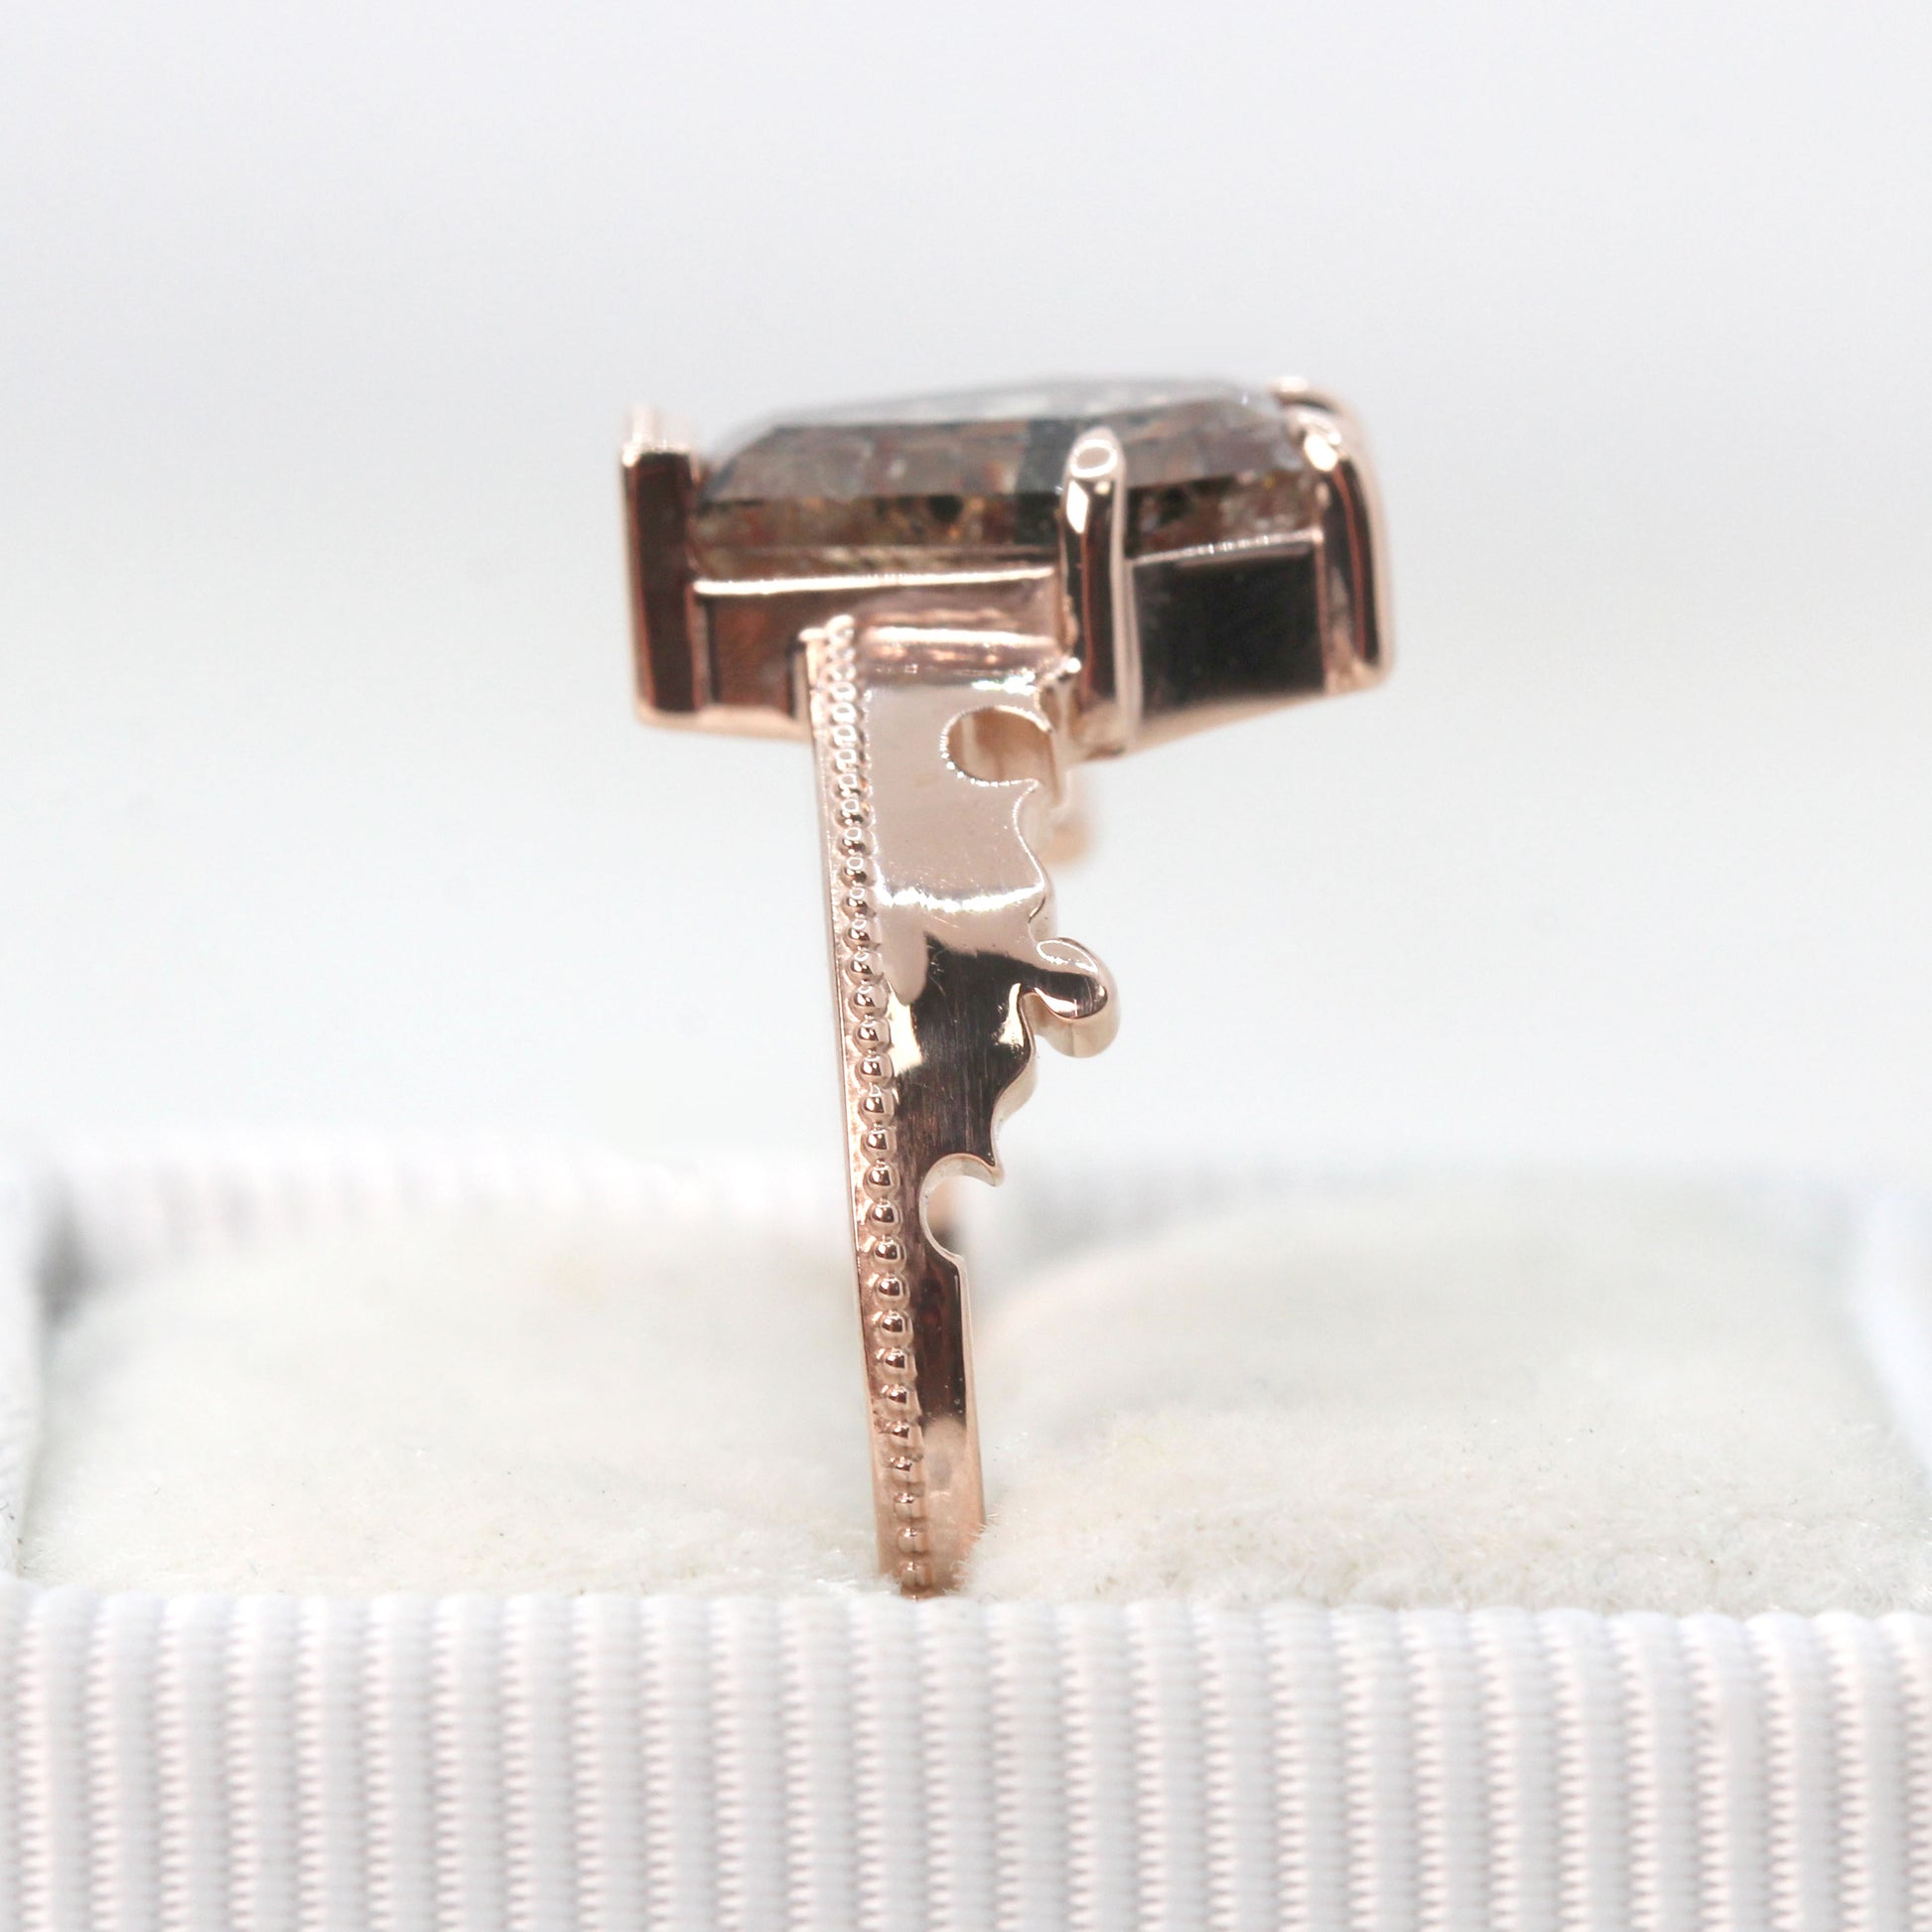 Azrael Ring with a 2.16 Carat Coffin Cut Champagne Brown Celestial Diamond in 14k Rose Gold - Ready to Size and Ship - Midwinter Co. Alternative Bridal Rings and Modern Fine Jewelry